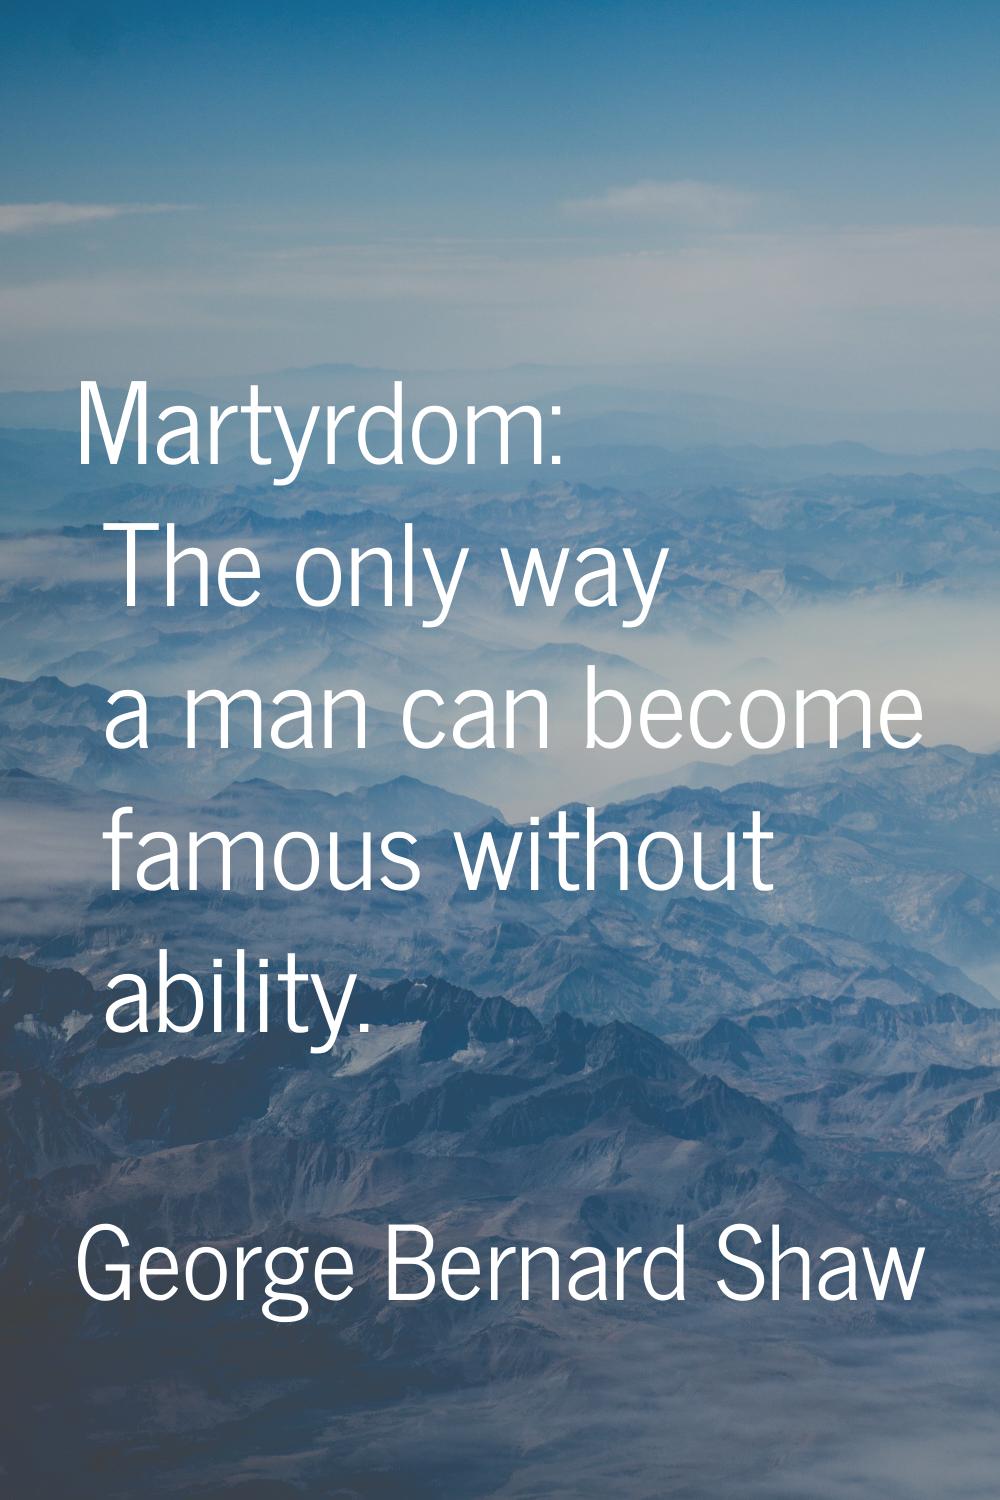 Martyrdom: The only way a man can become famous without ability.